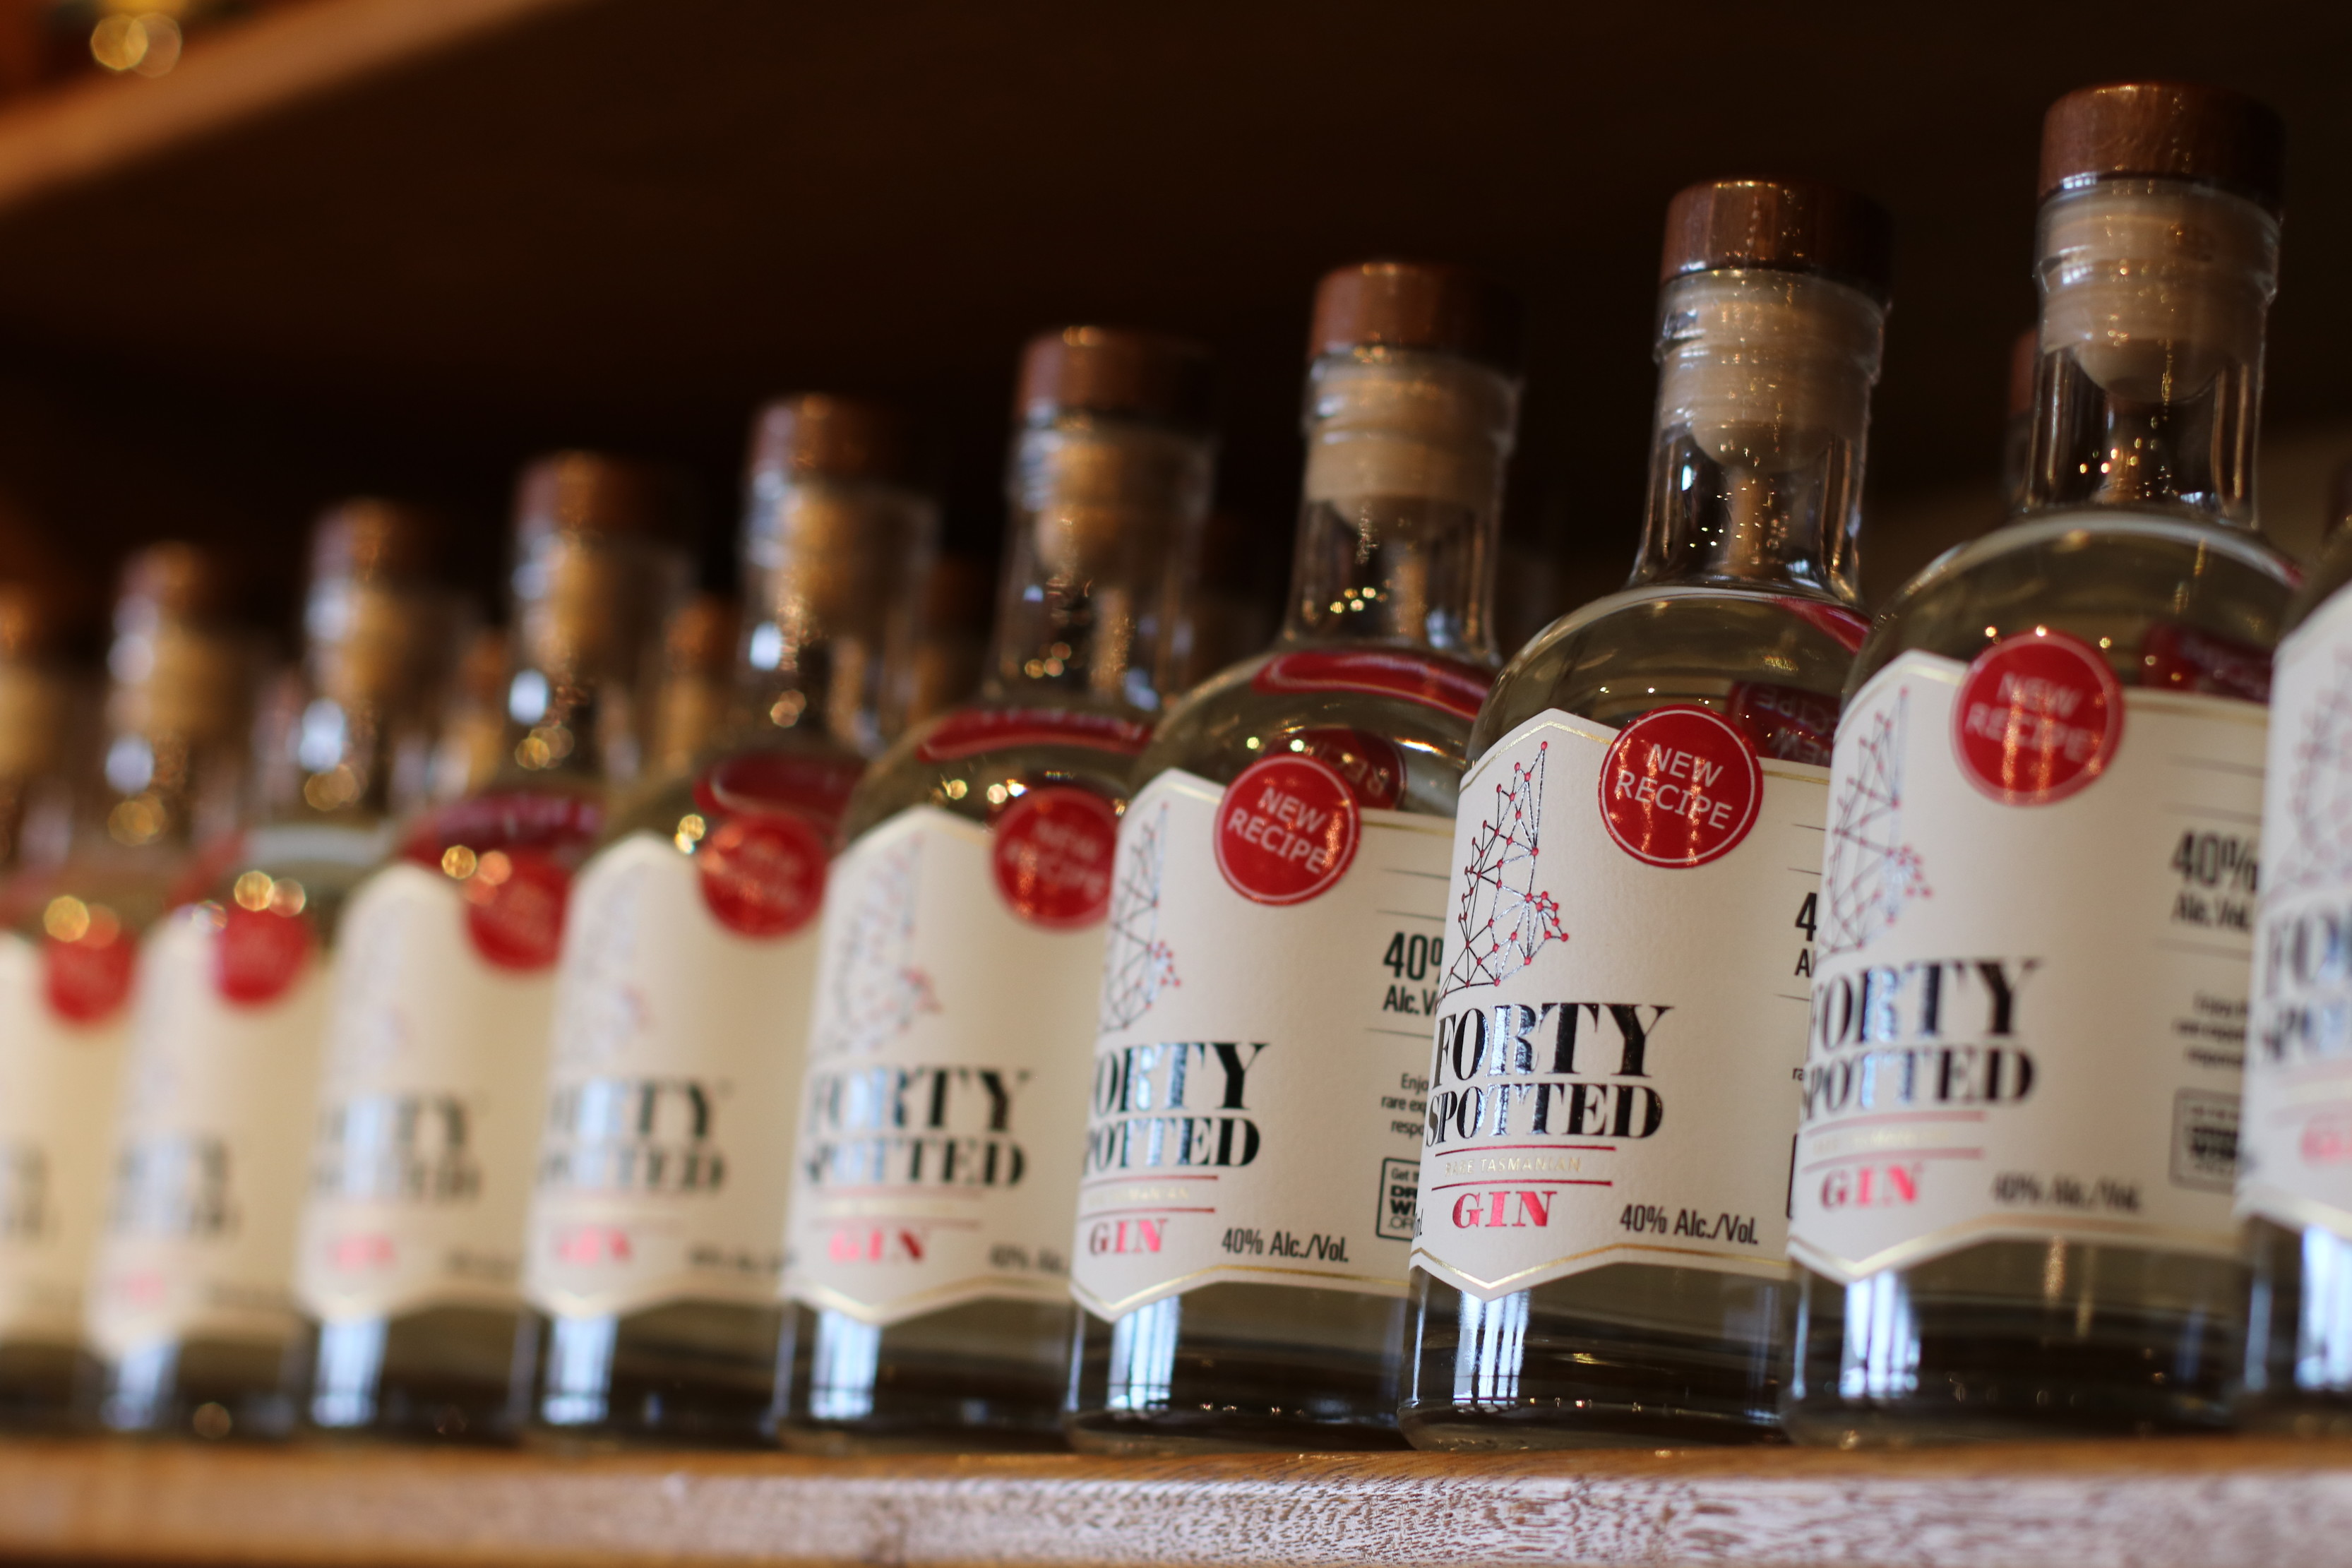 Close up of bottles of Forty Spotted Rare Tasmanian Gin by Lark Distillery, lined up on a shelf.